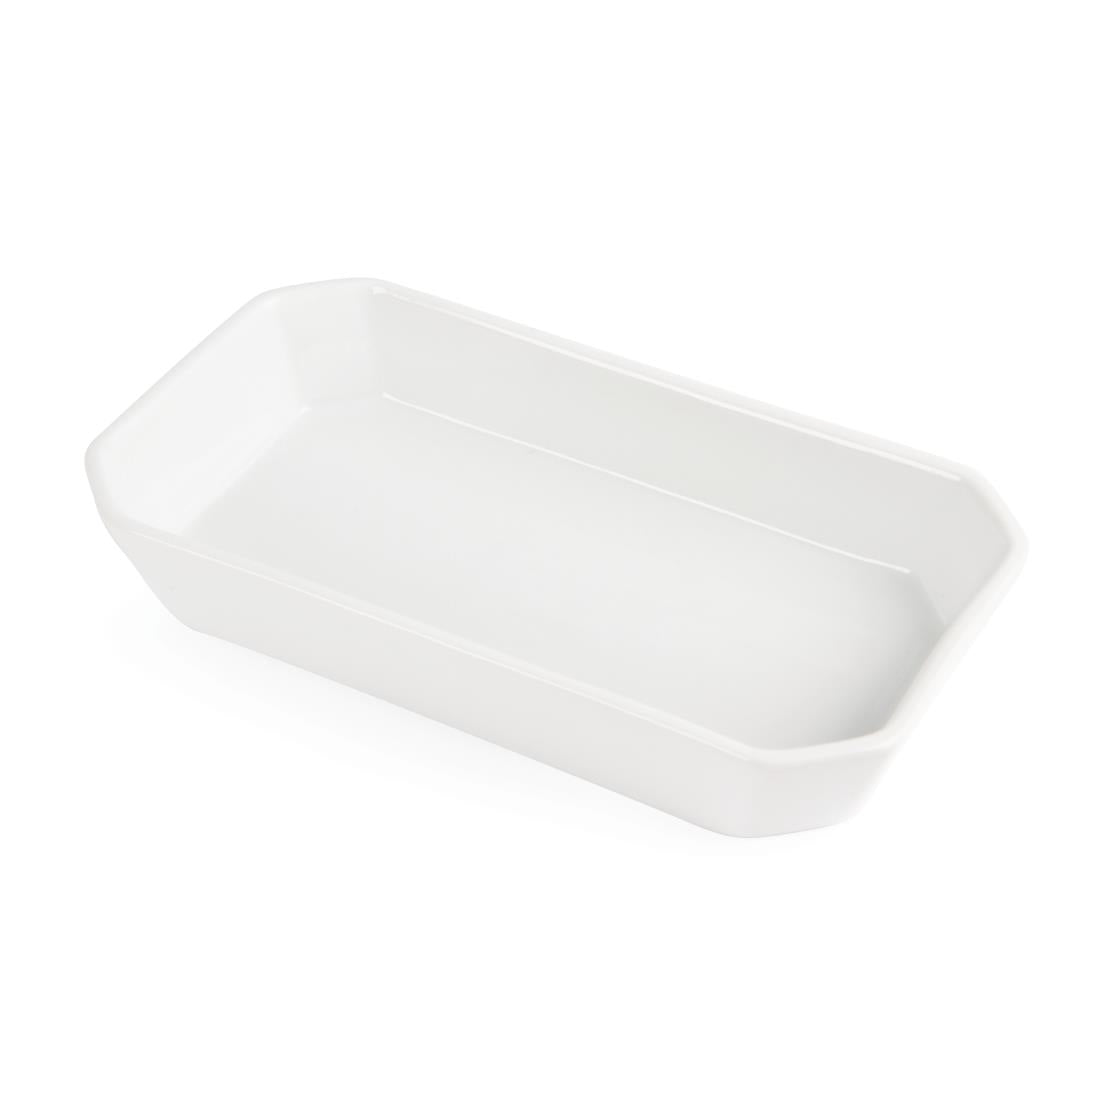 W438 Olympia Whiteware Oblong Hors d'Oeuvre Dishes 235x 122mm (Pack of 6)